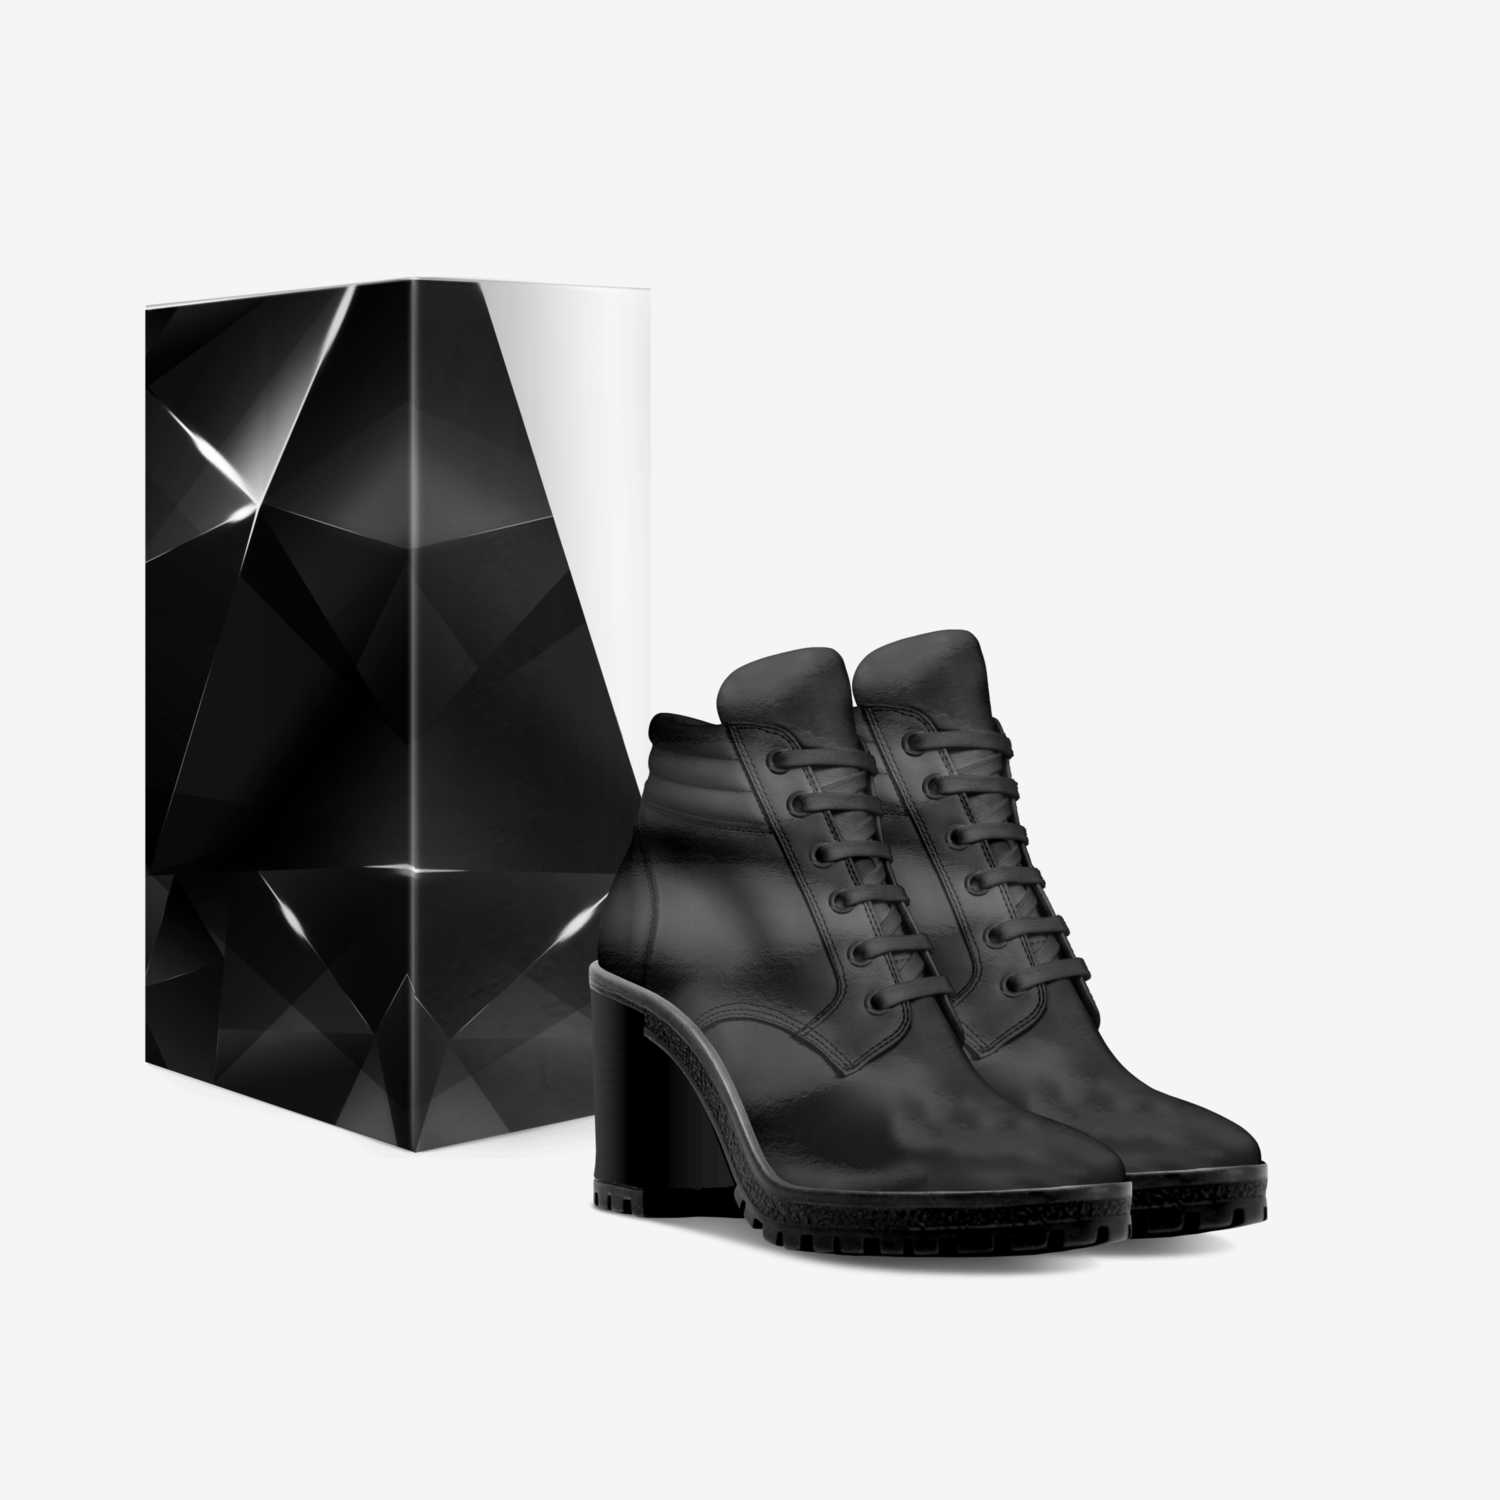 HE BOOT HEEL custom made in Italy shoes by Bj Min | Box view